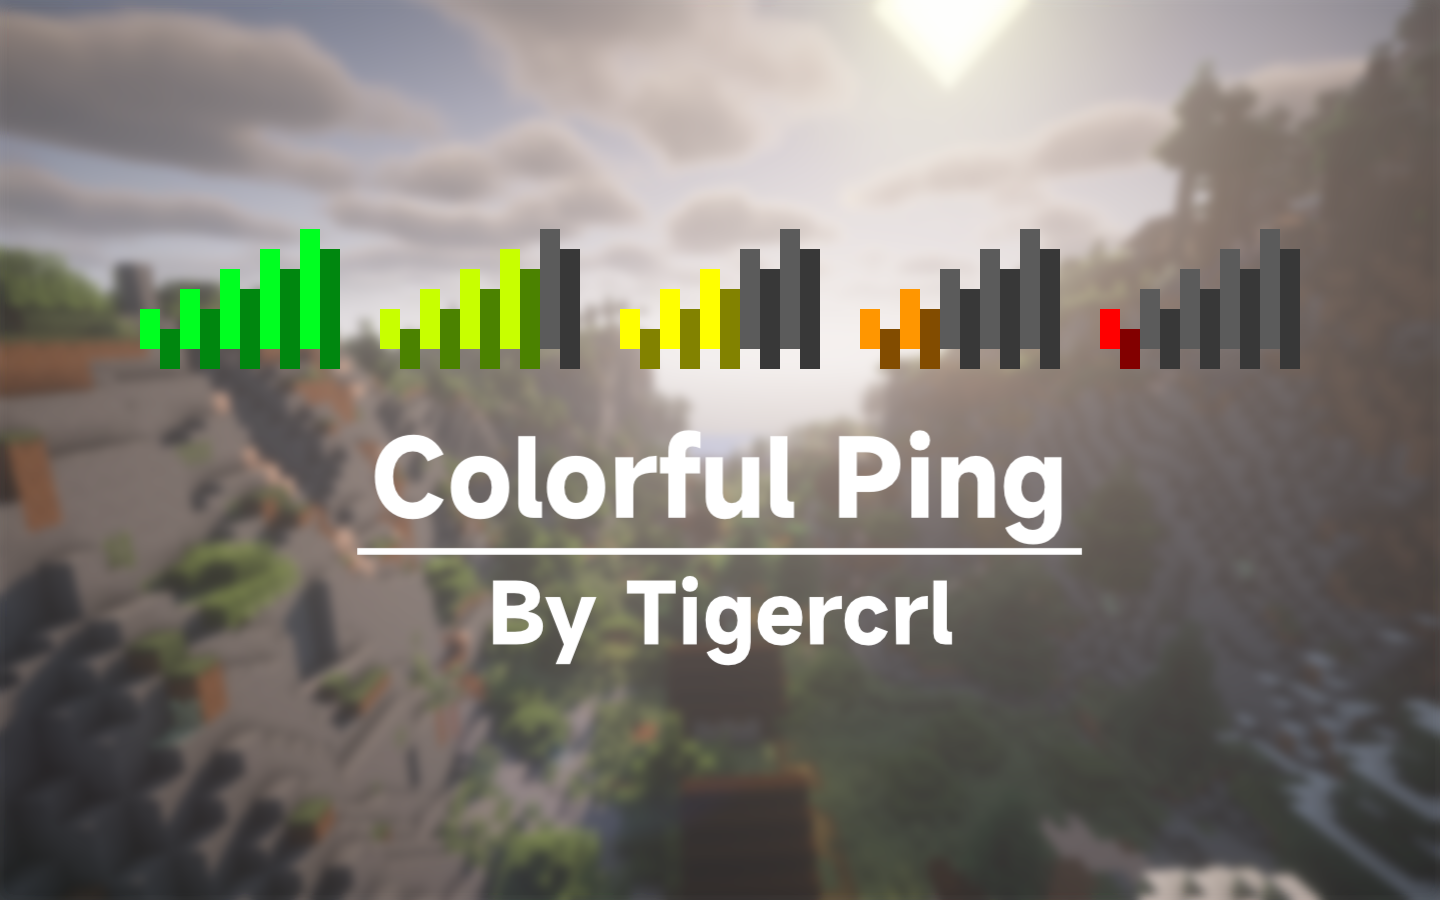 Colorful Ping